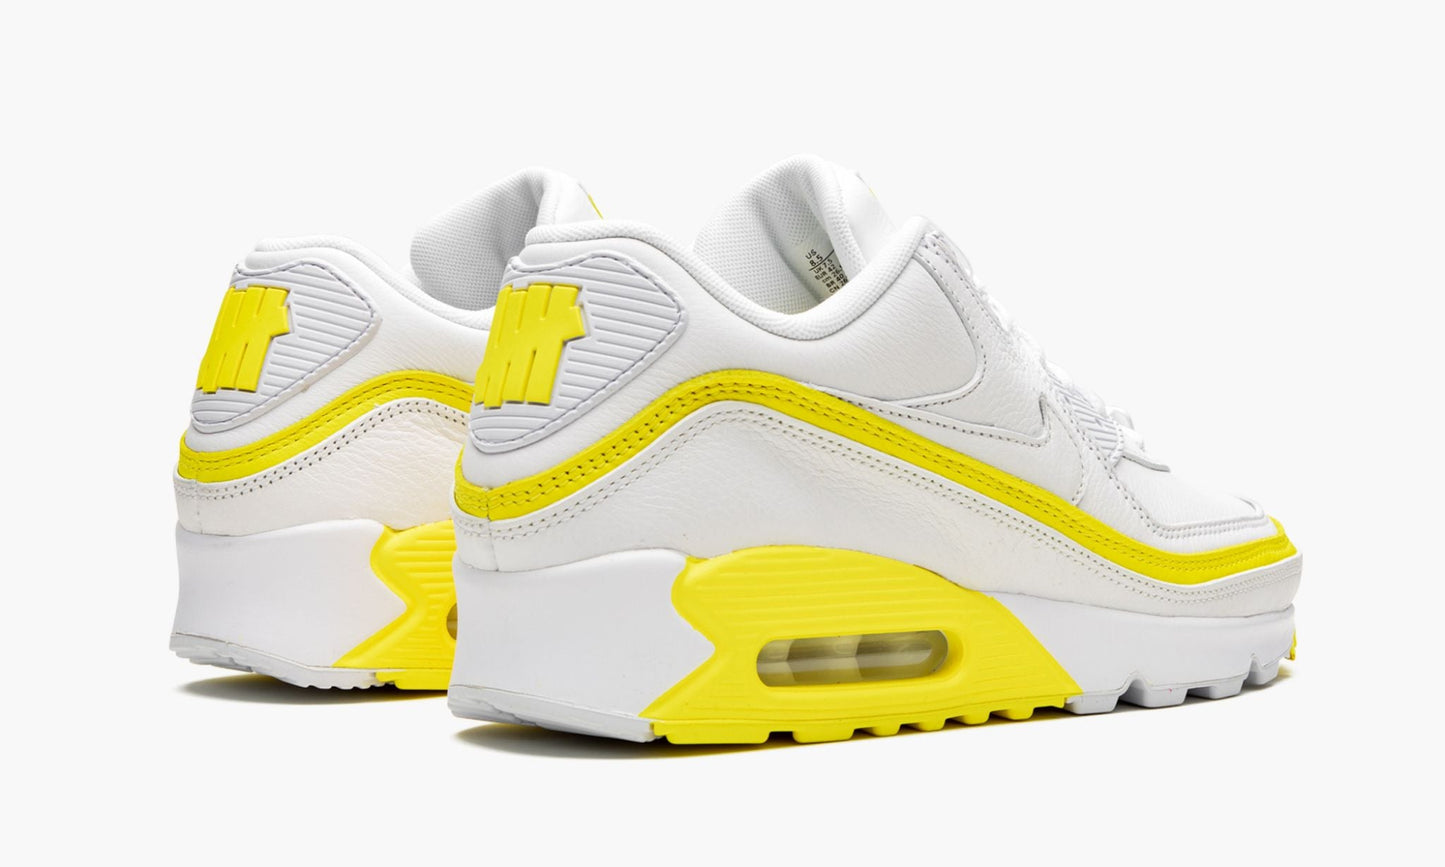 Air Max 90 / UNDFTD "Undefeated - White/Optic Yellow"